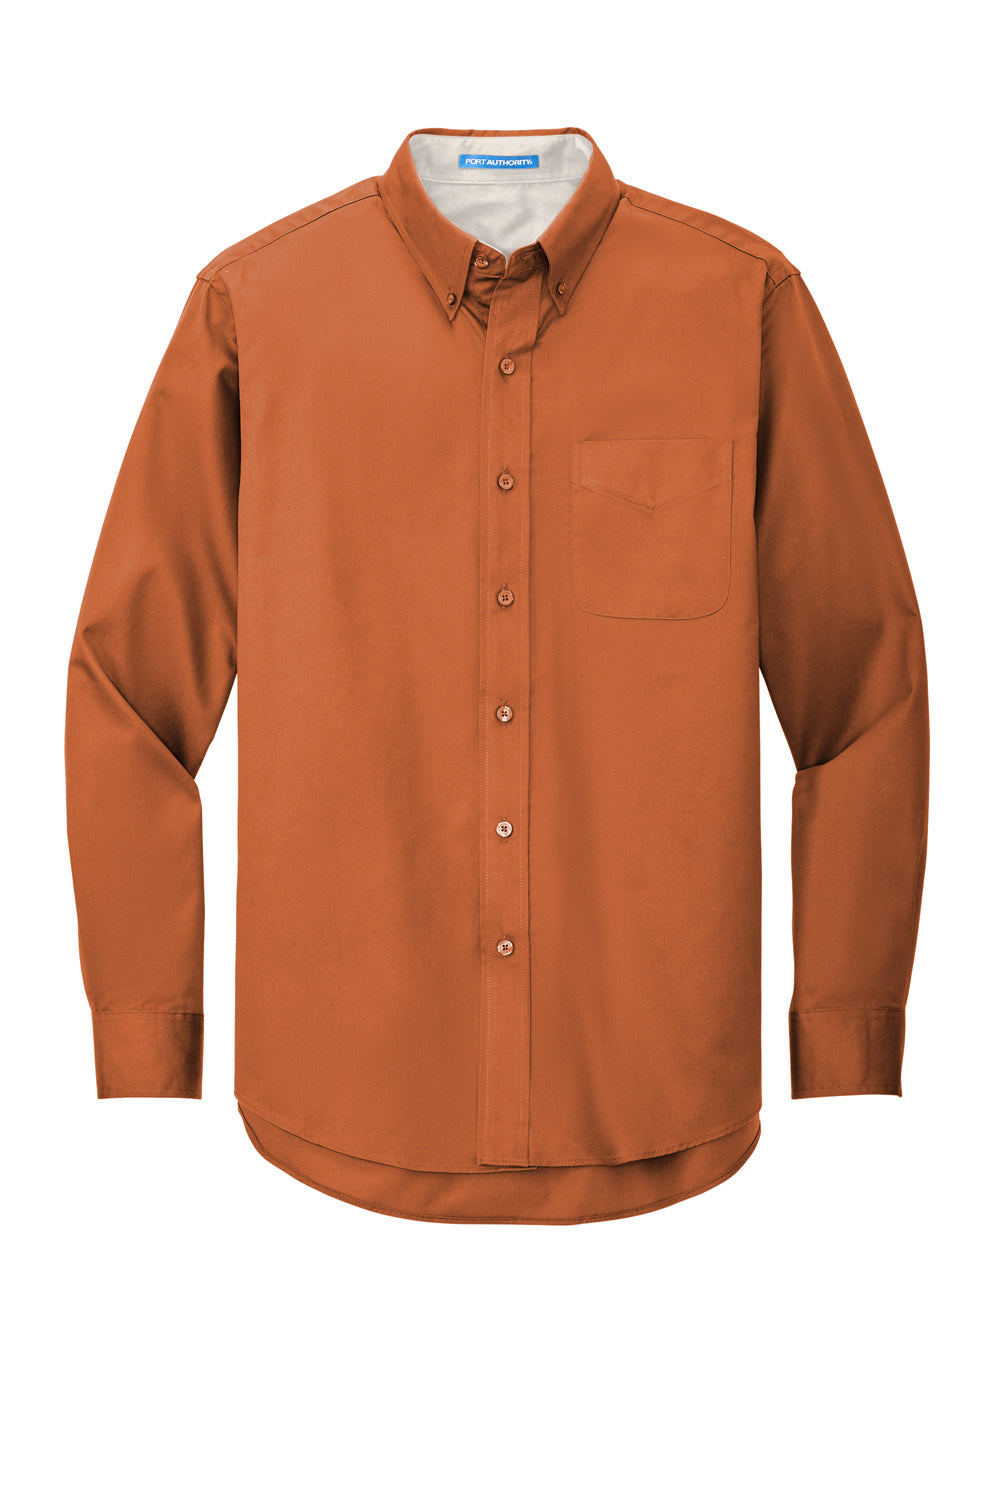 Port Authority S608/TLS608/S608ES Mens Easy Care Wrinkle Resistant Long Sleeve Button Down Shirt w/ Pocket Texas Orange Flat Front